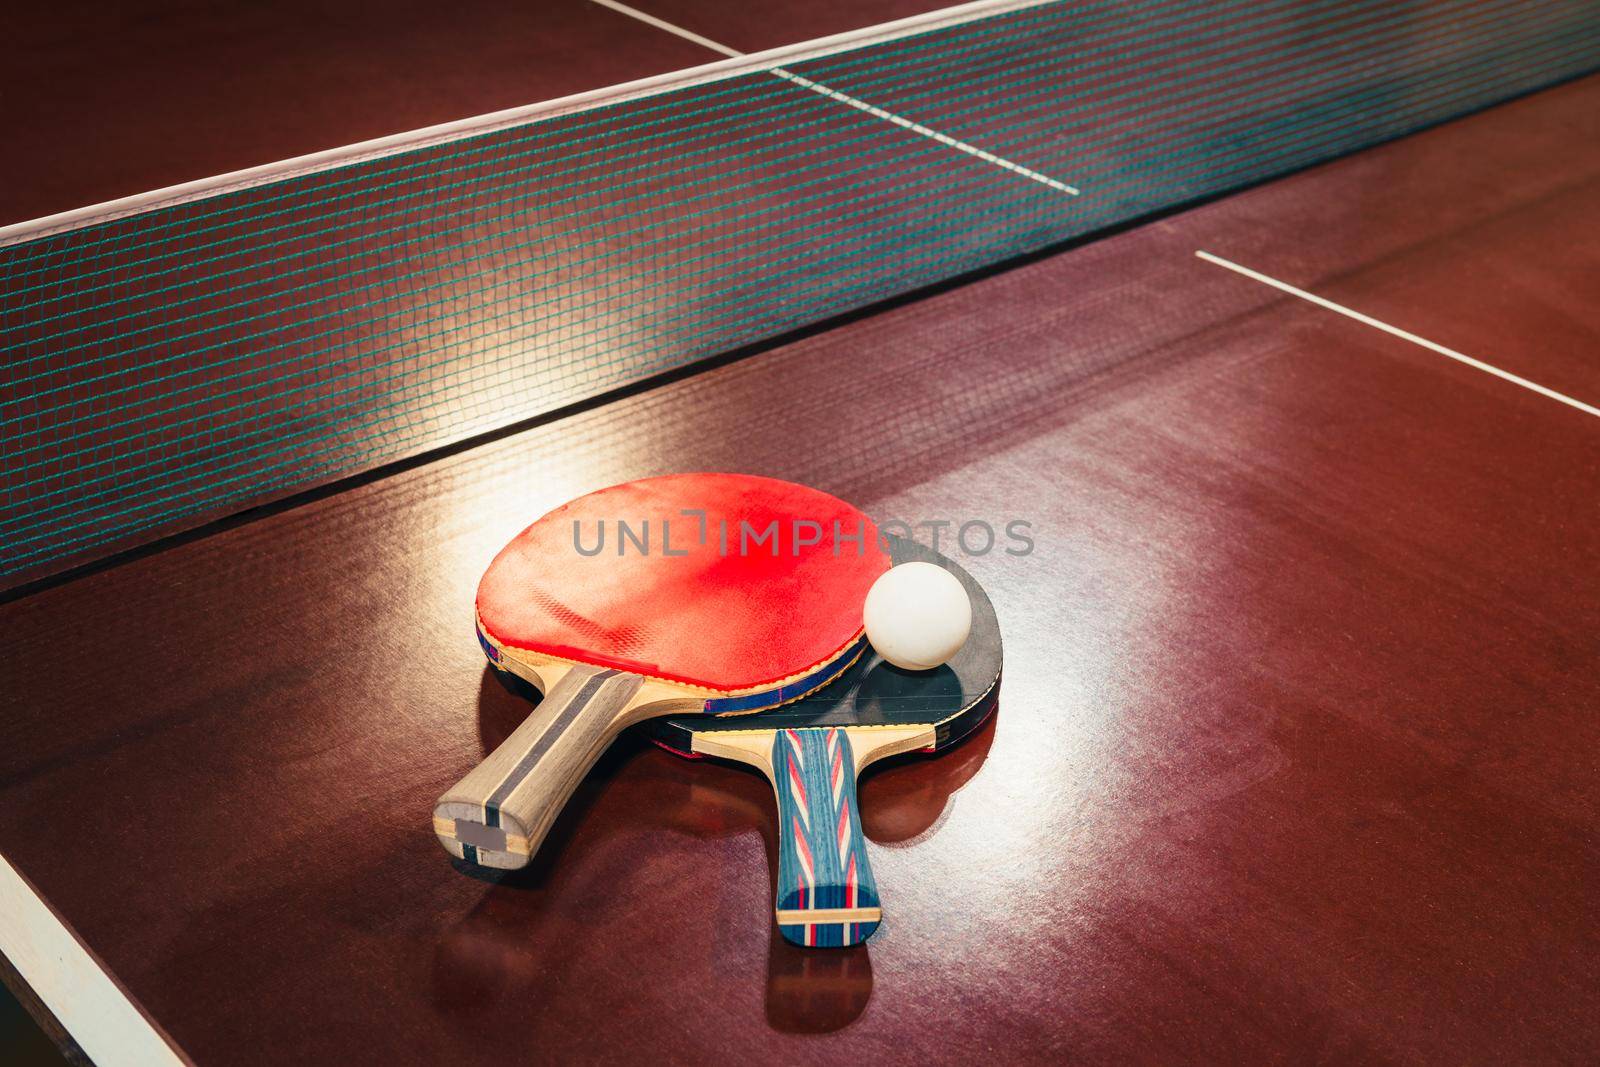 table tennis rackets and ball, net background by nikkytok